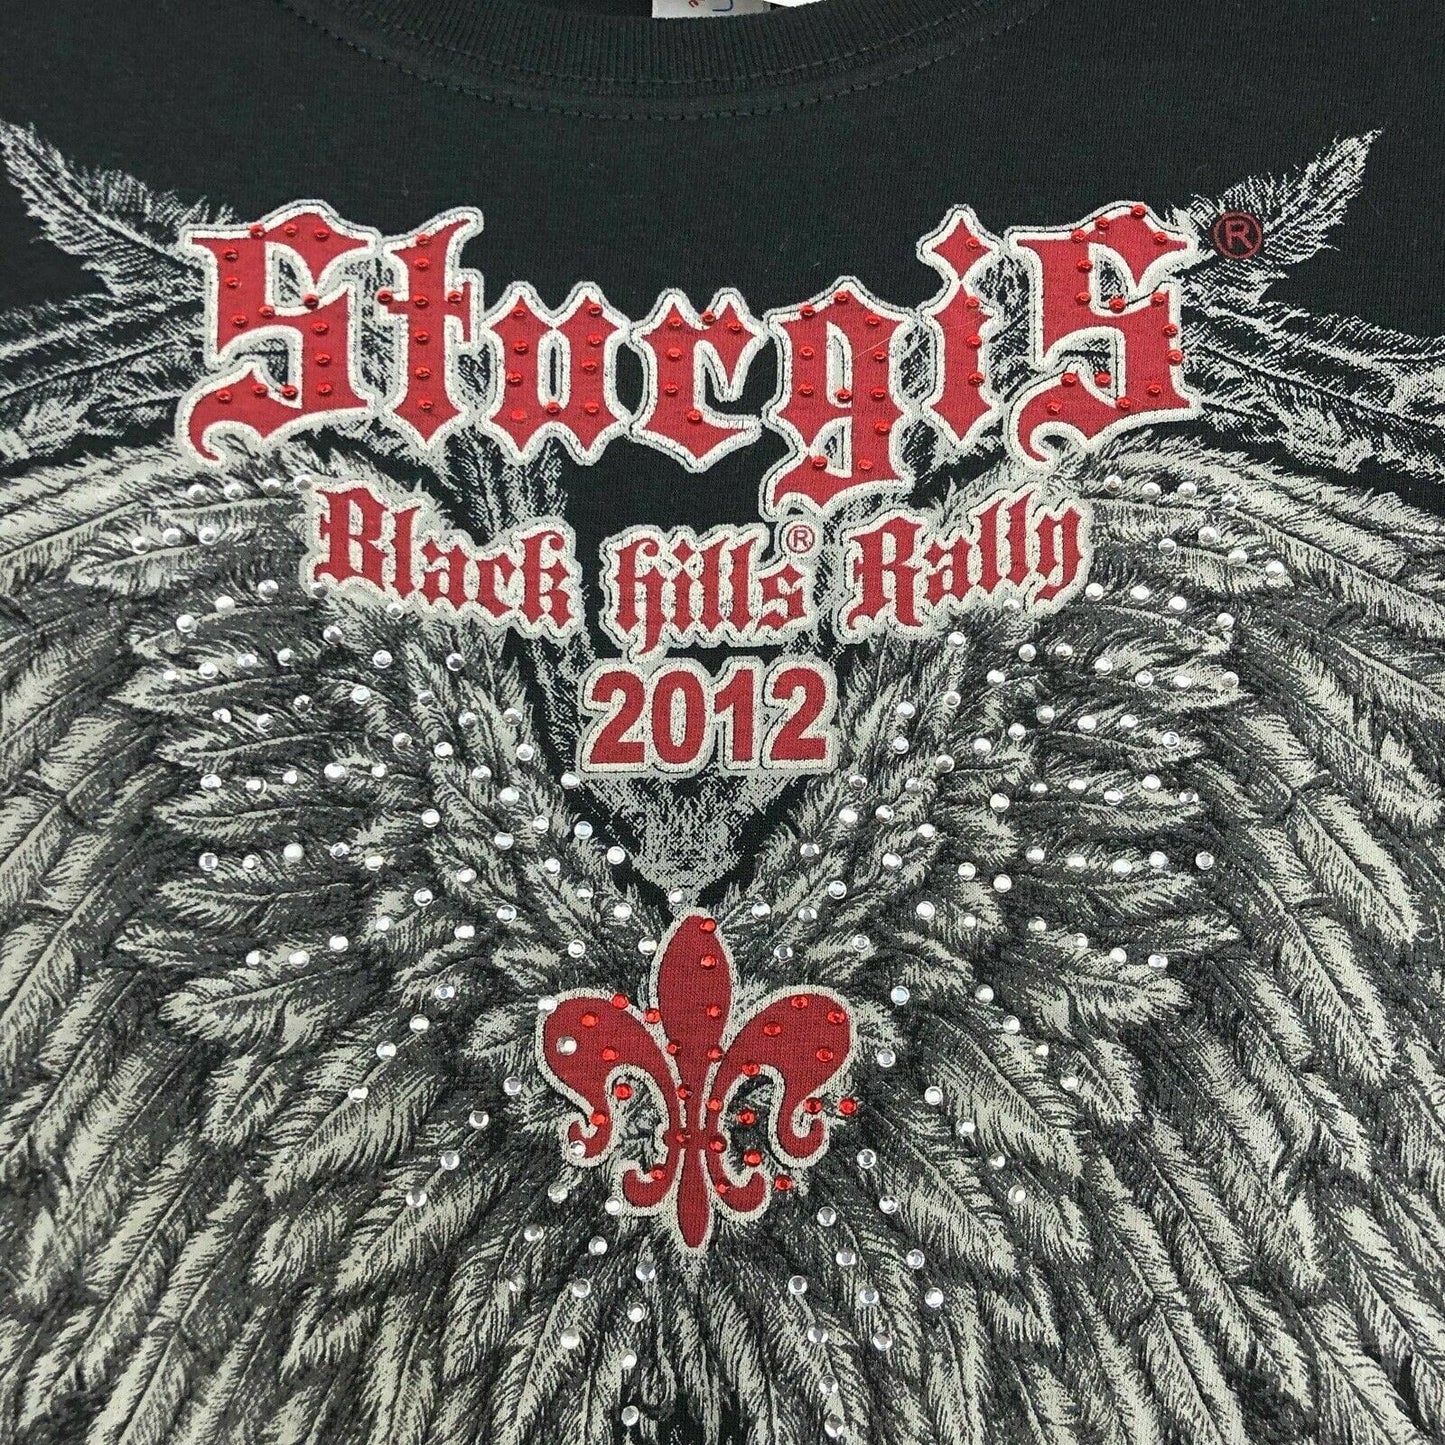 Womens Size L Black T-Shirt Sturgis Rally 2012 Graphic Studded